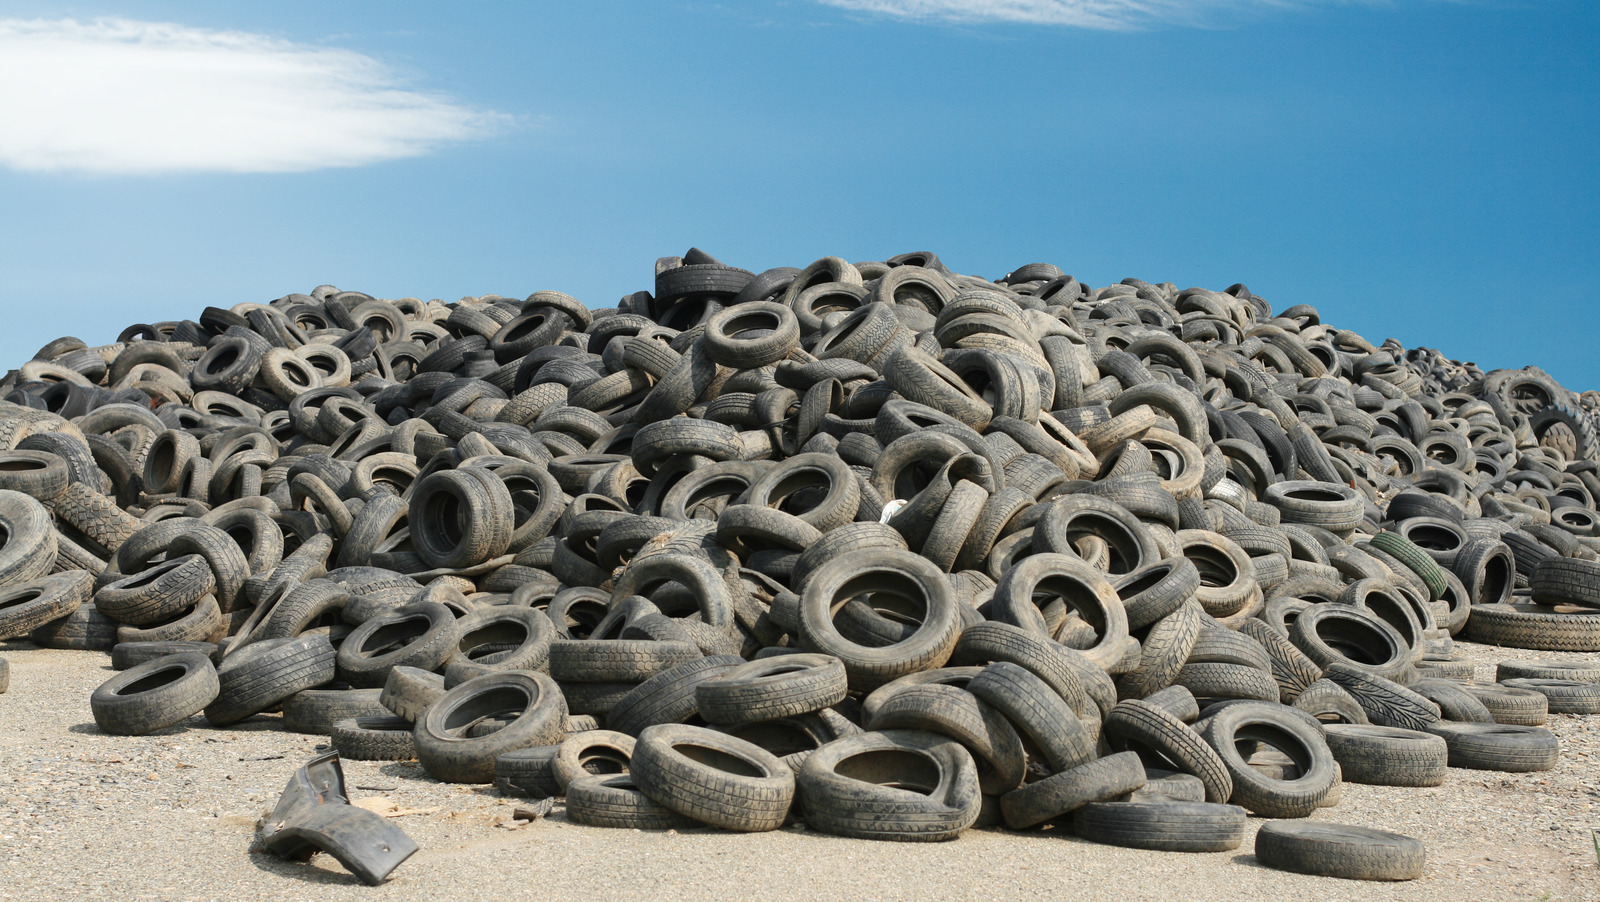 3 Unexpected Uses For Old Tires